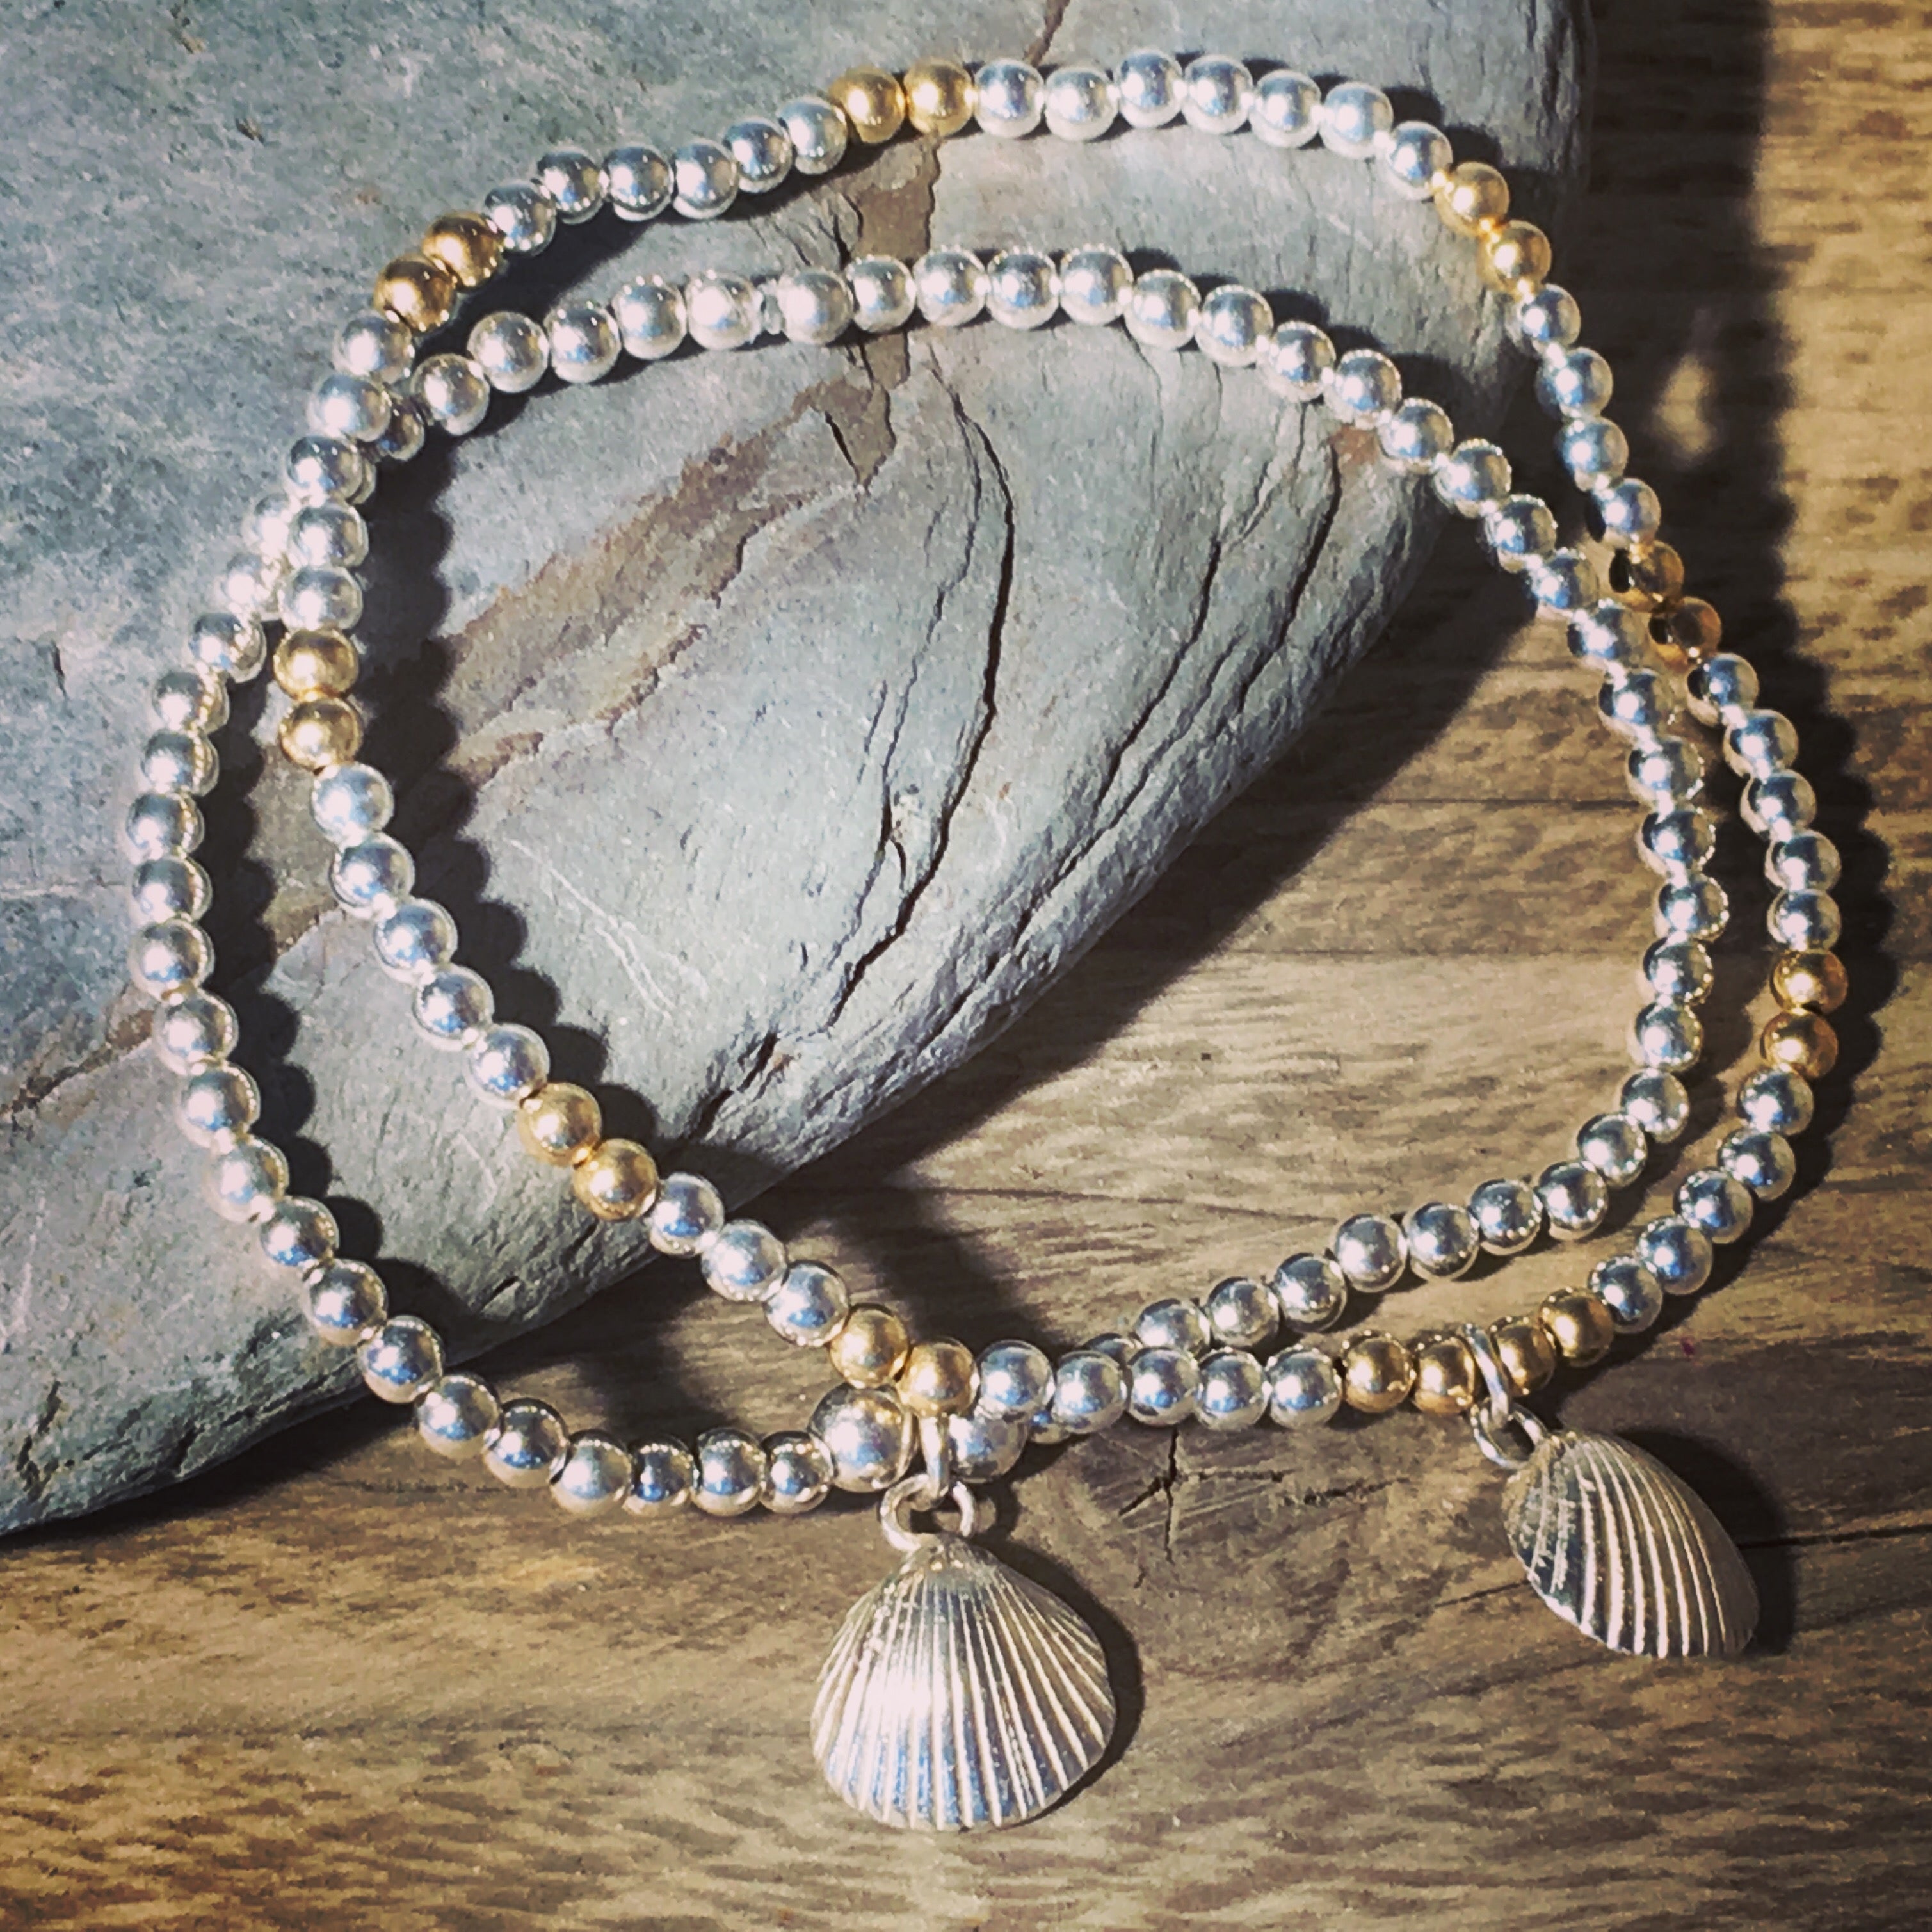 Silver and gold beaded bracelet with cockle shell charm.